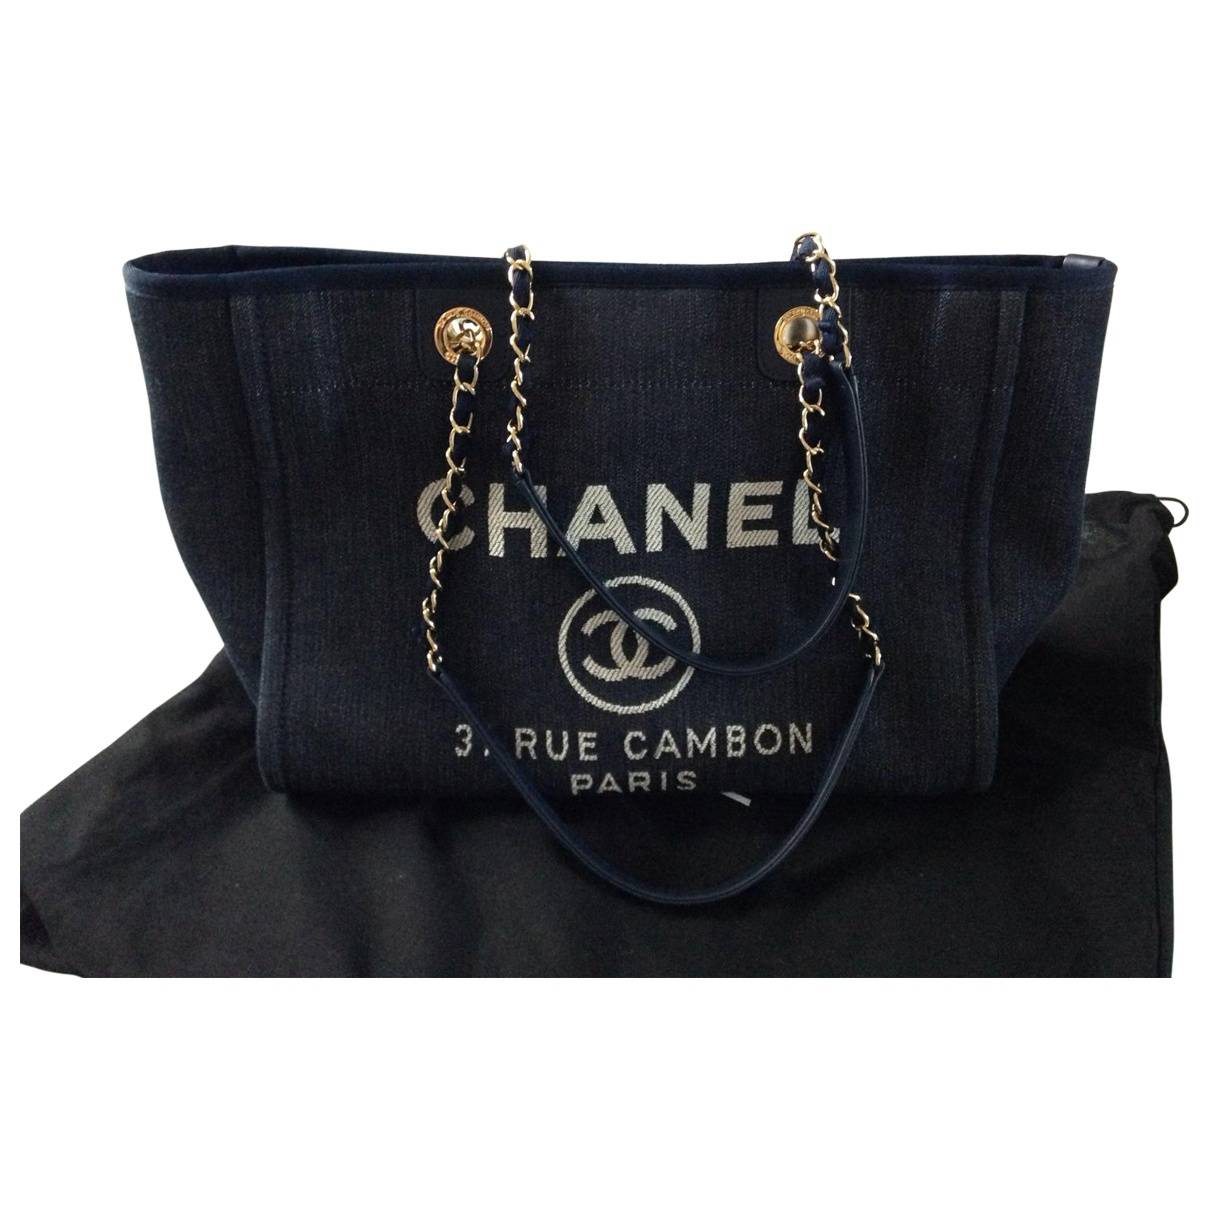 Chanel 31 rue cambon bag Chanel Other in Cotton - 1132423